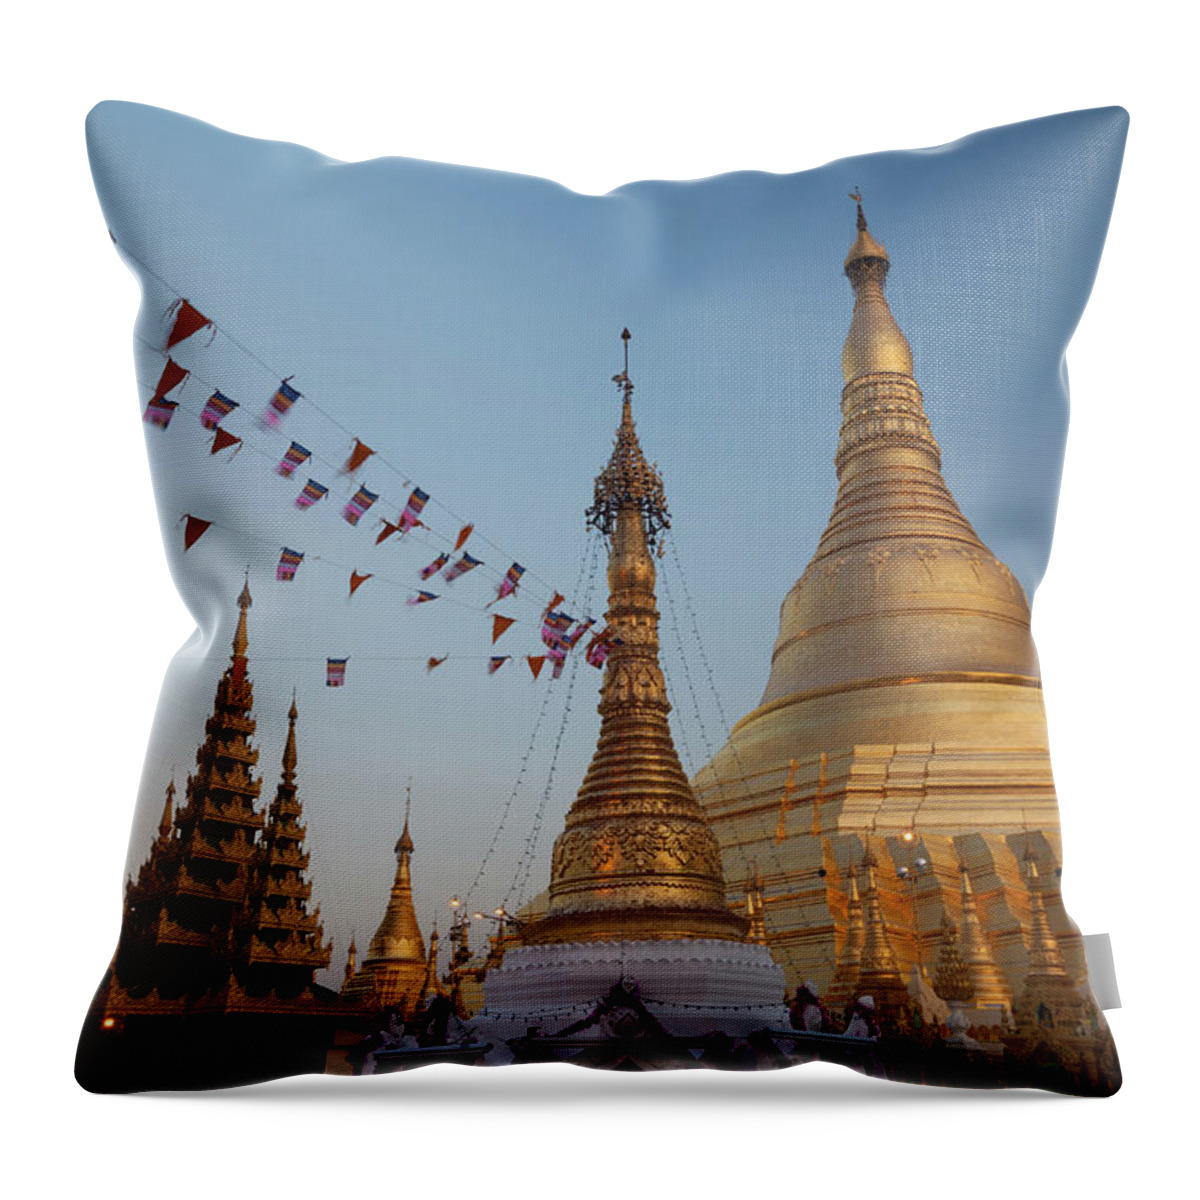 Pagoda Throw Pillow featuring the photograph Shwedagon Pagoda, Yangon, Myanmar by Mint Images/ Art Wolfe